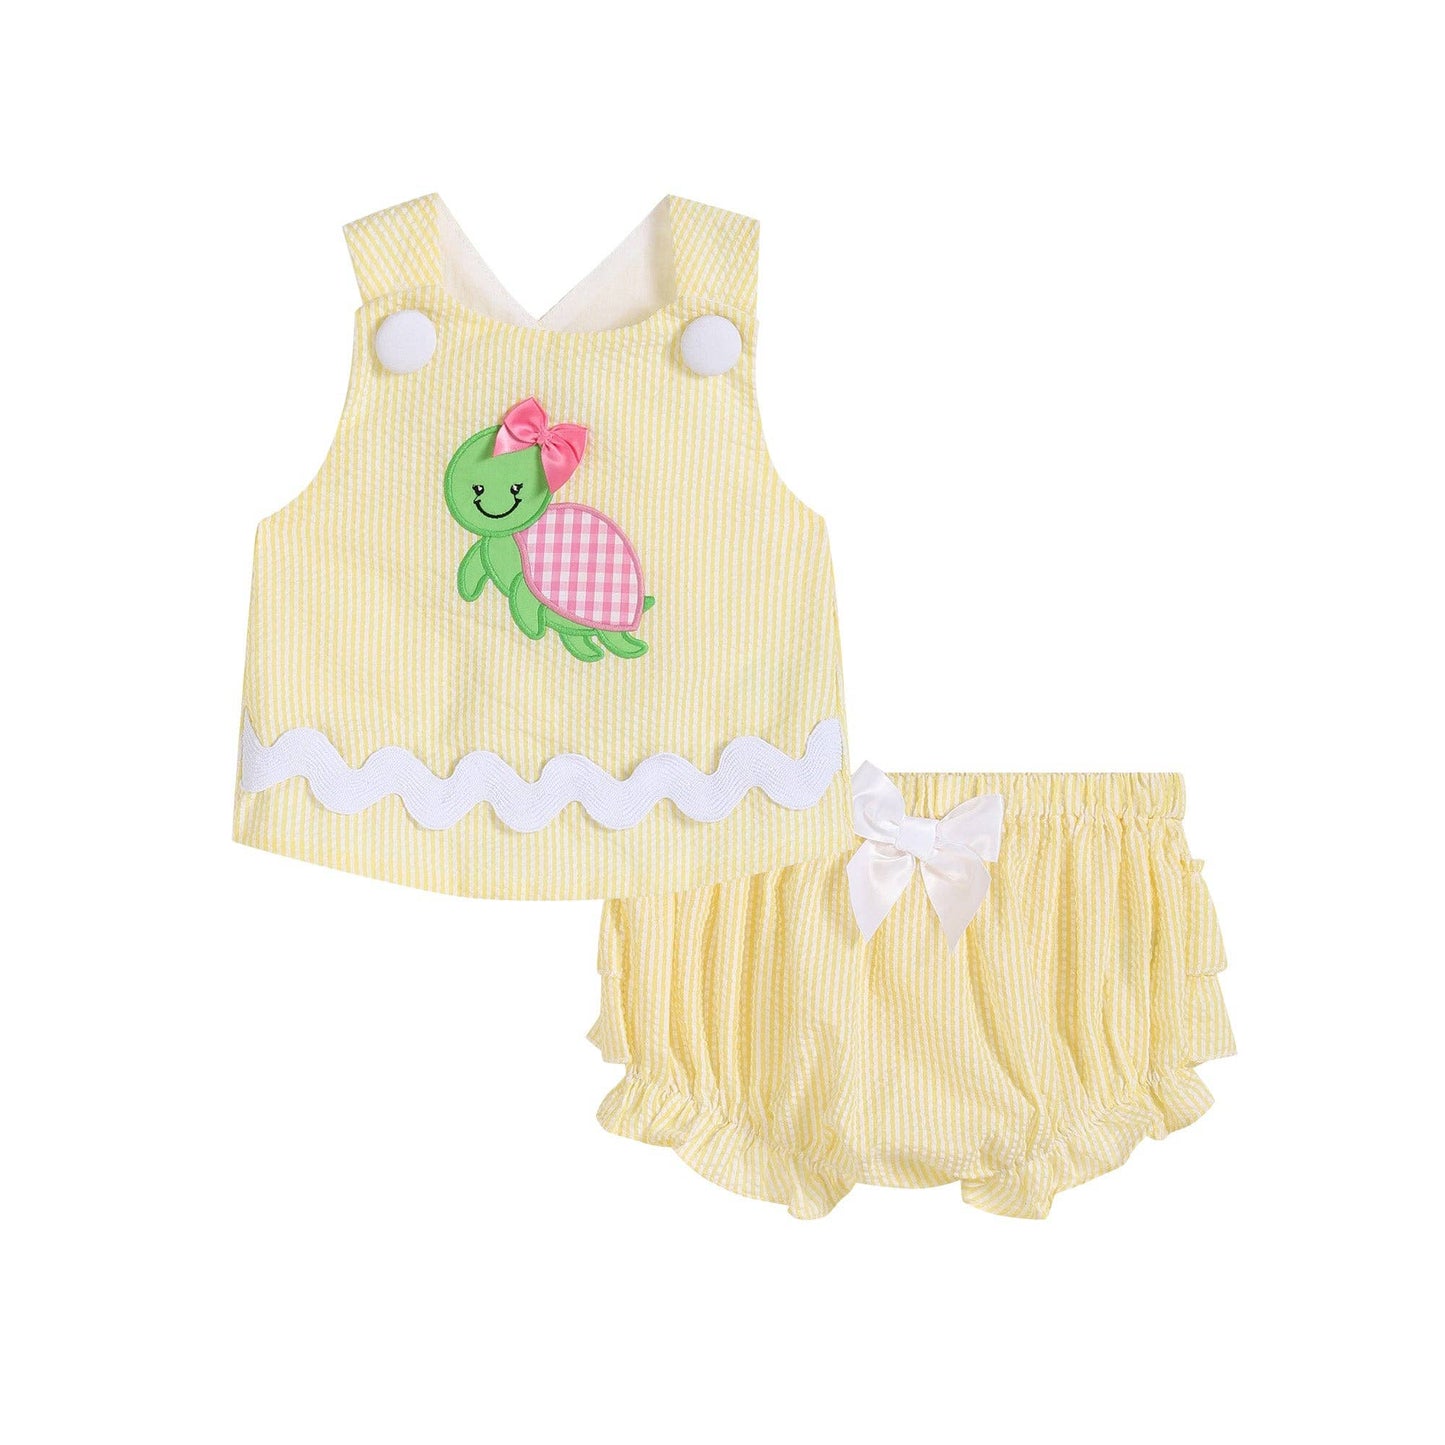 A baby girl's Yellow Seersucker Turtle 2pc Baby Bloomer Set: 12-18M with a turtle applique, made from soft cotton material by Lil Cactus.